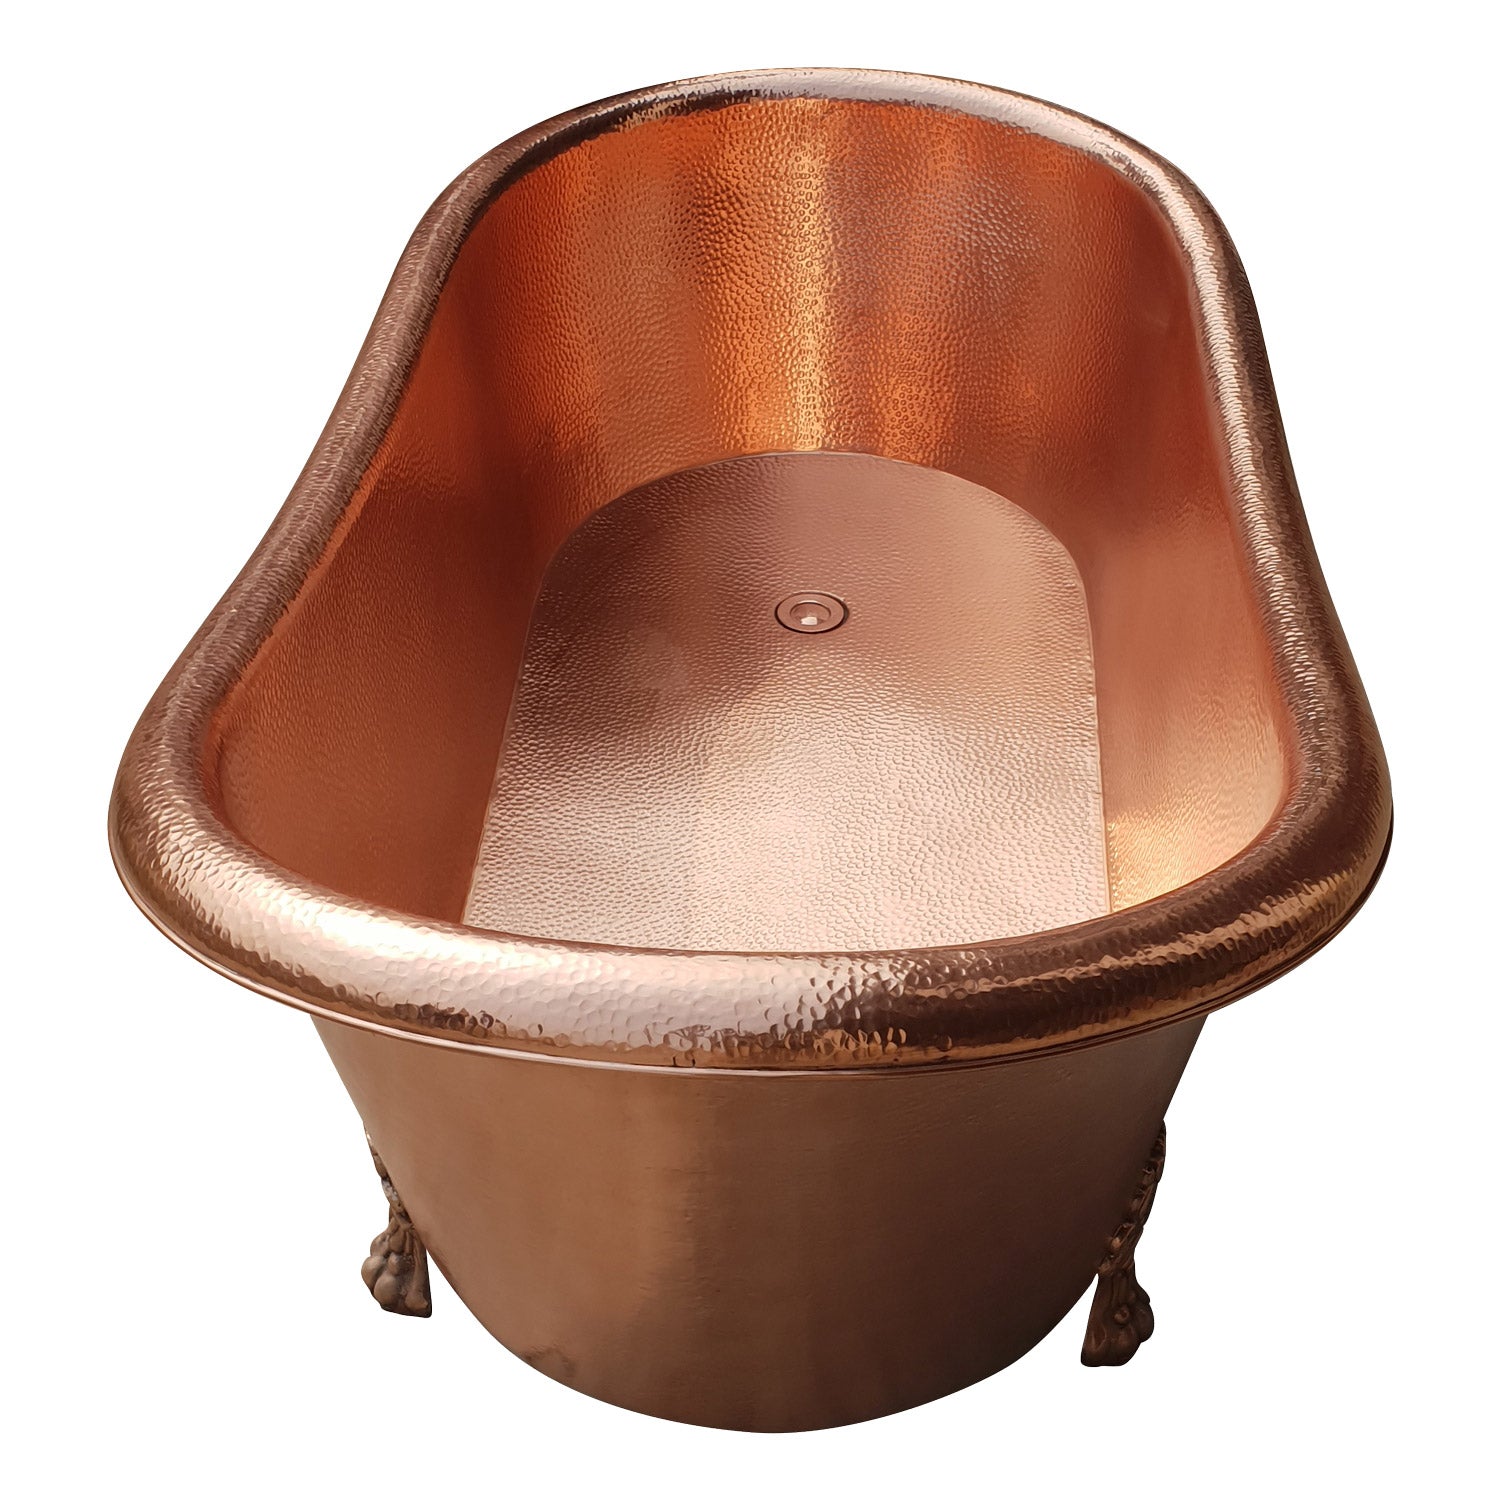 Coppersmith Clawfoot Copper Tub Hammered Freestanding Bath